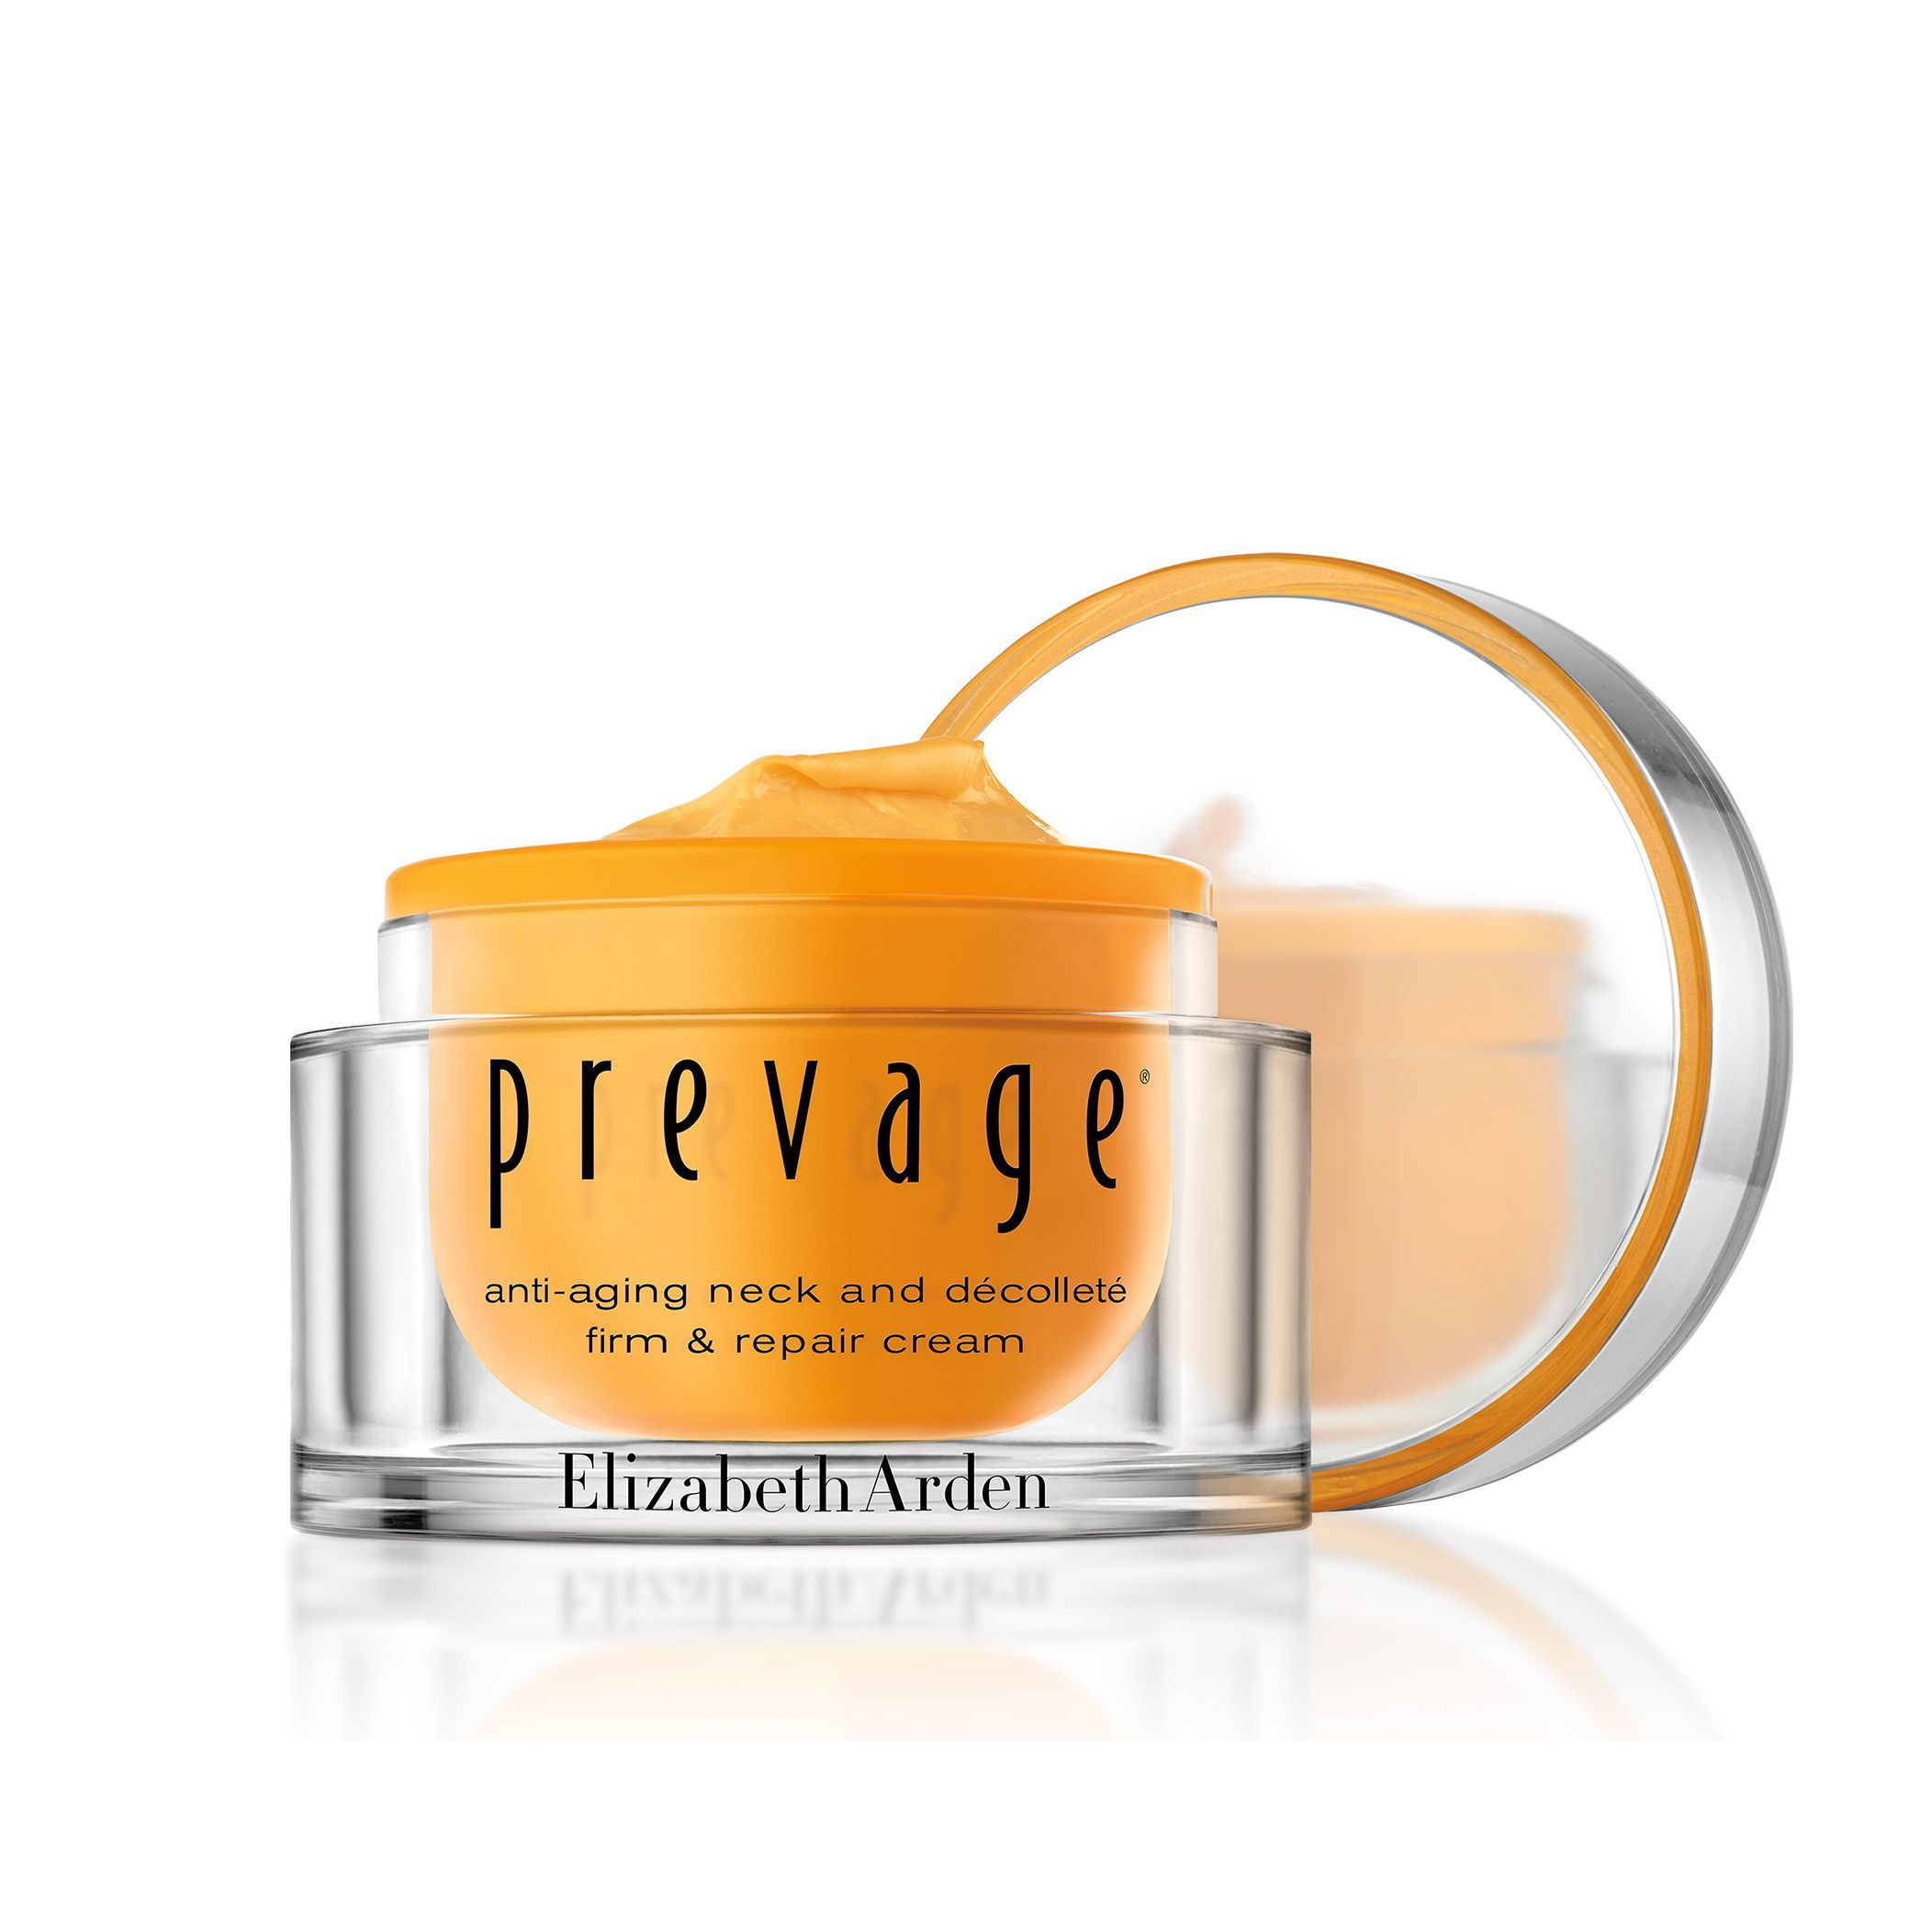 Prevage Anti-Aging Neck and Decollete Firm and Repair Cream